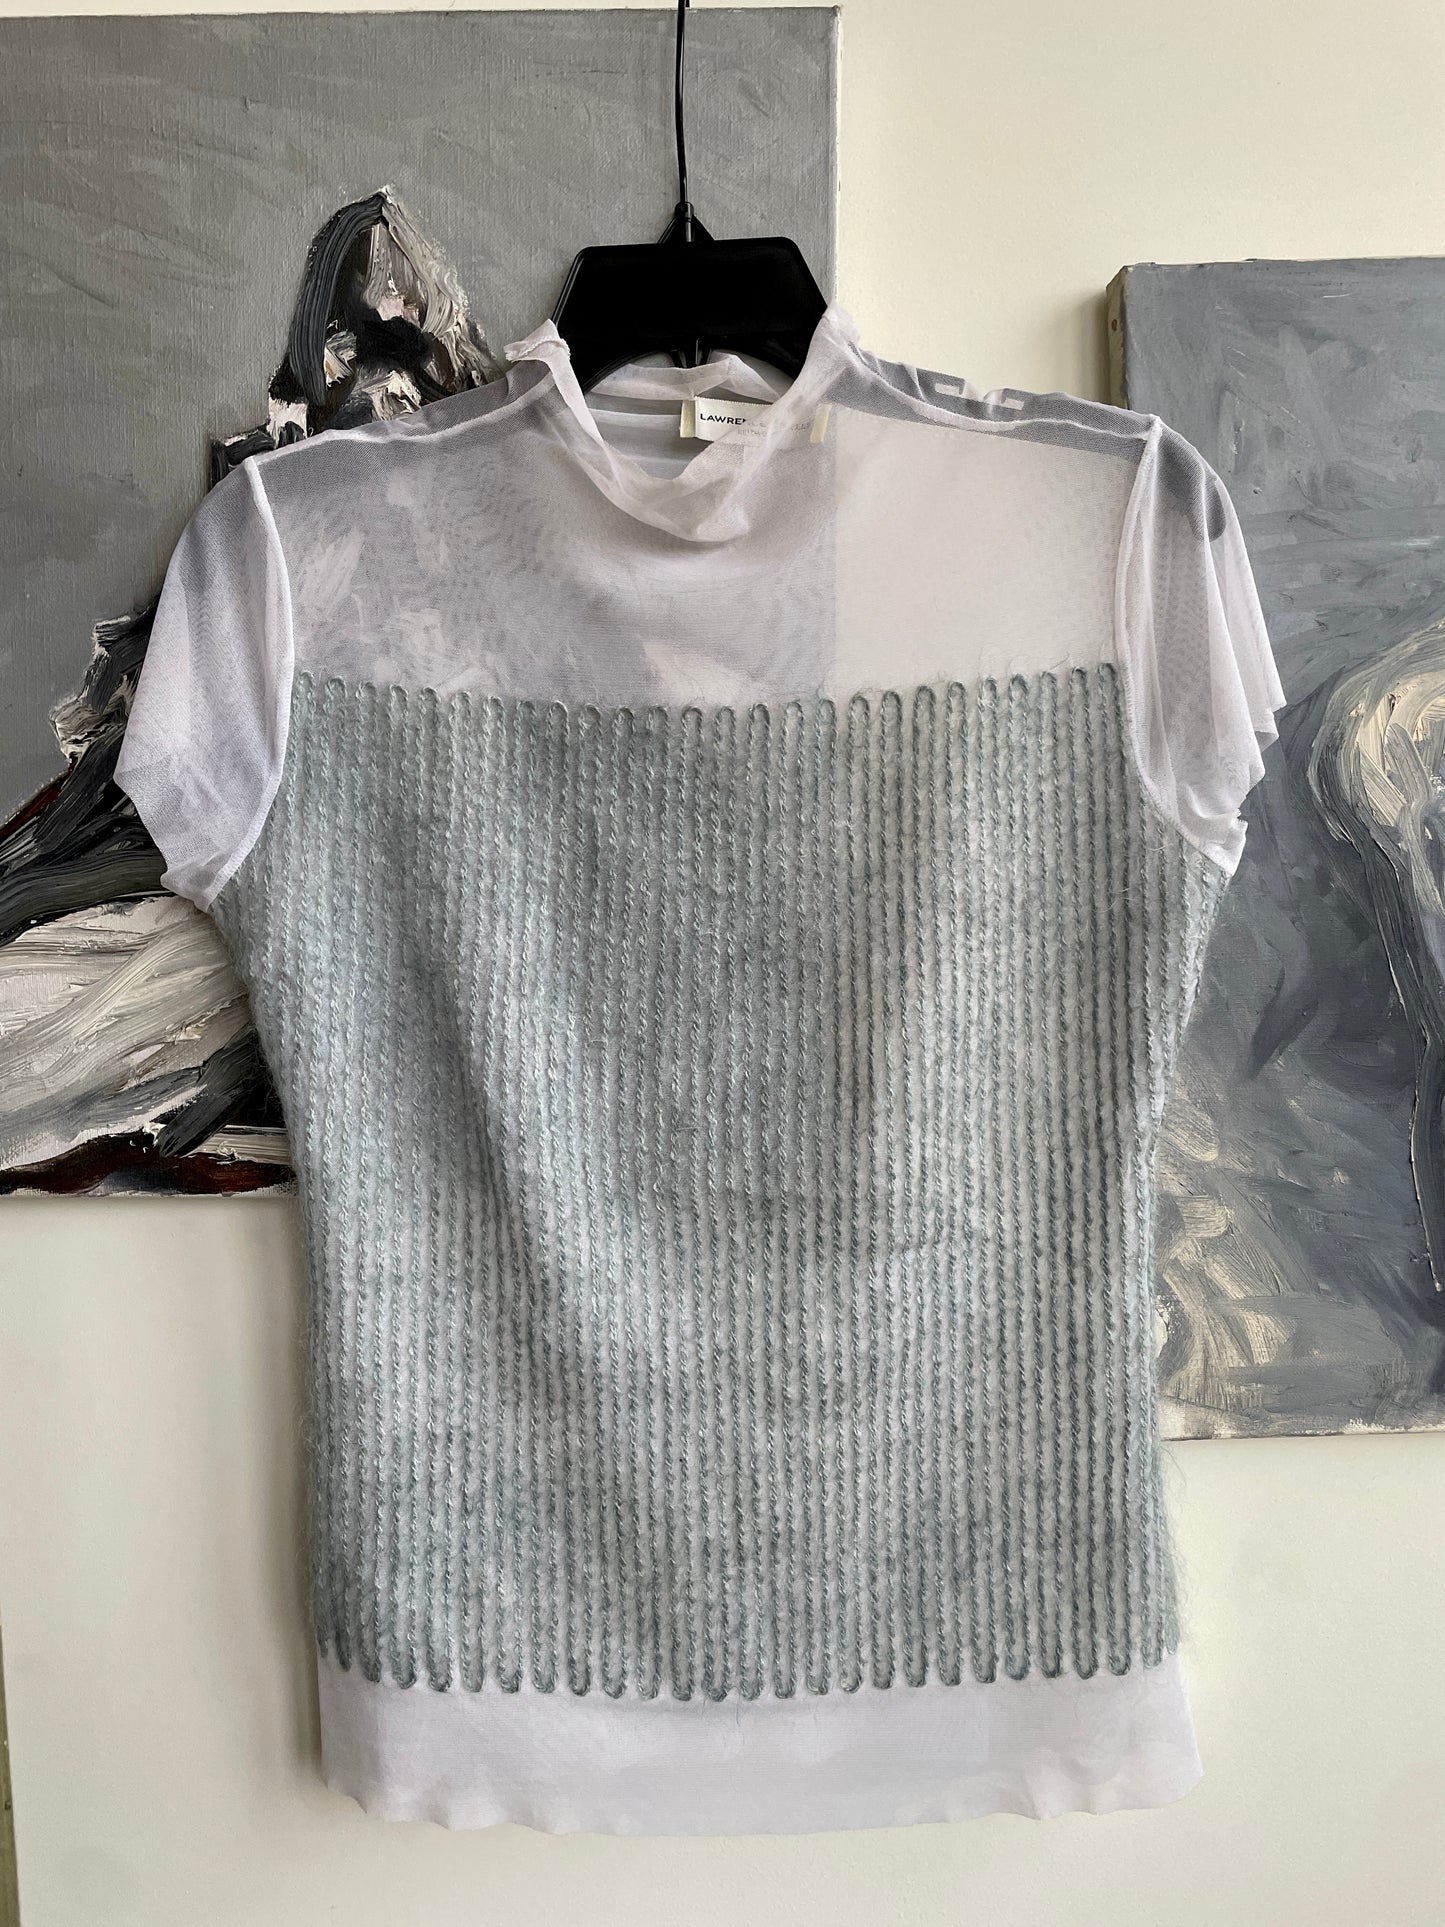 Lawrence Steel 90's sheer mesh off-white top with wool thread square